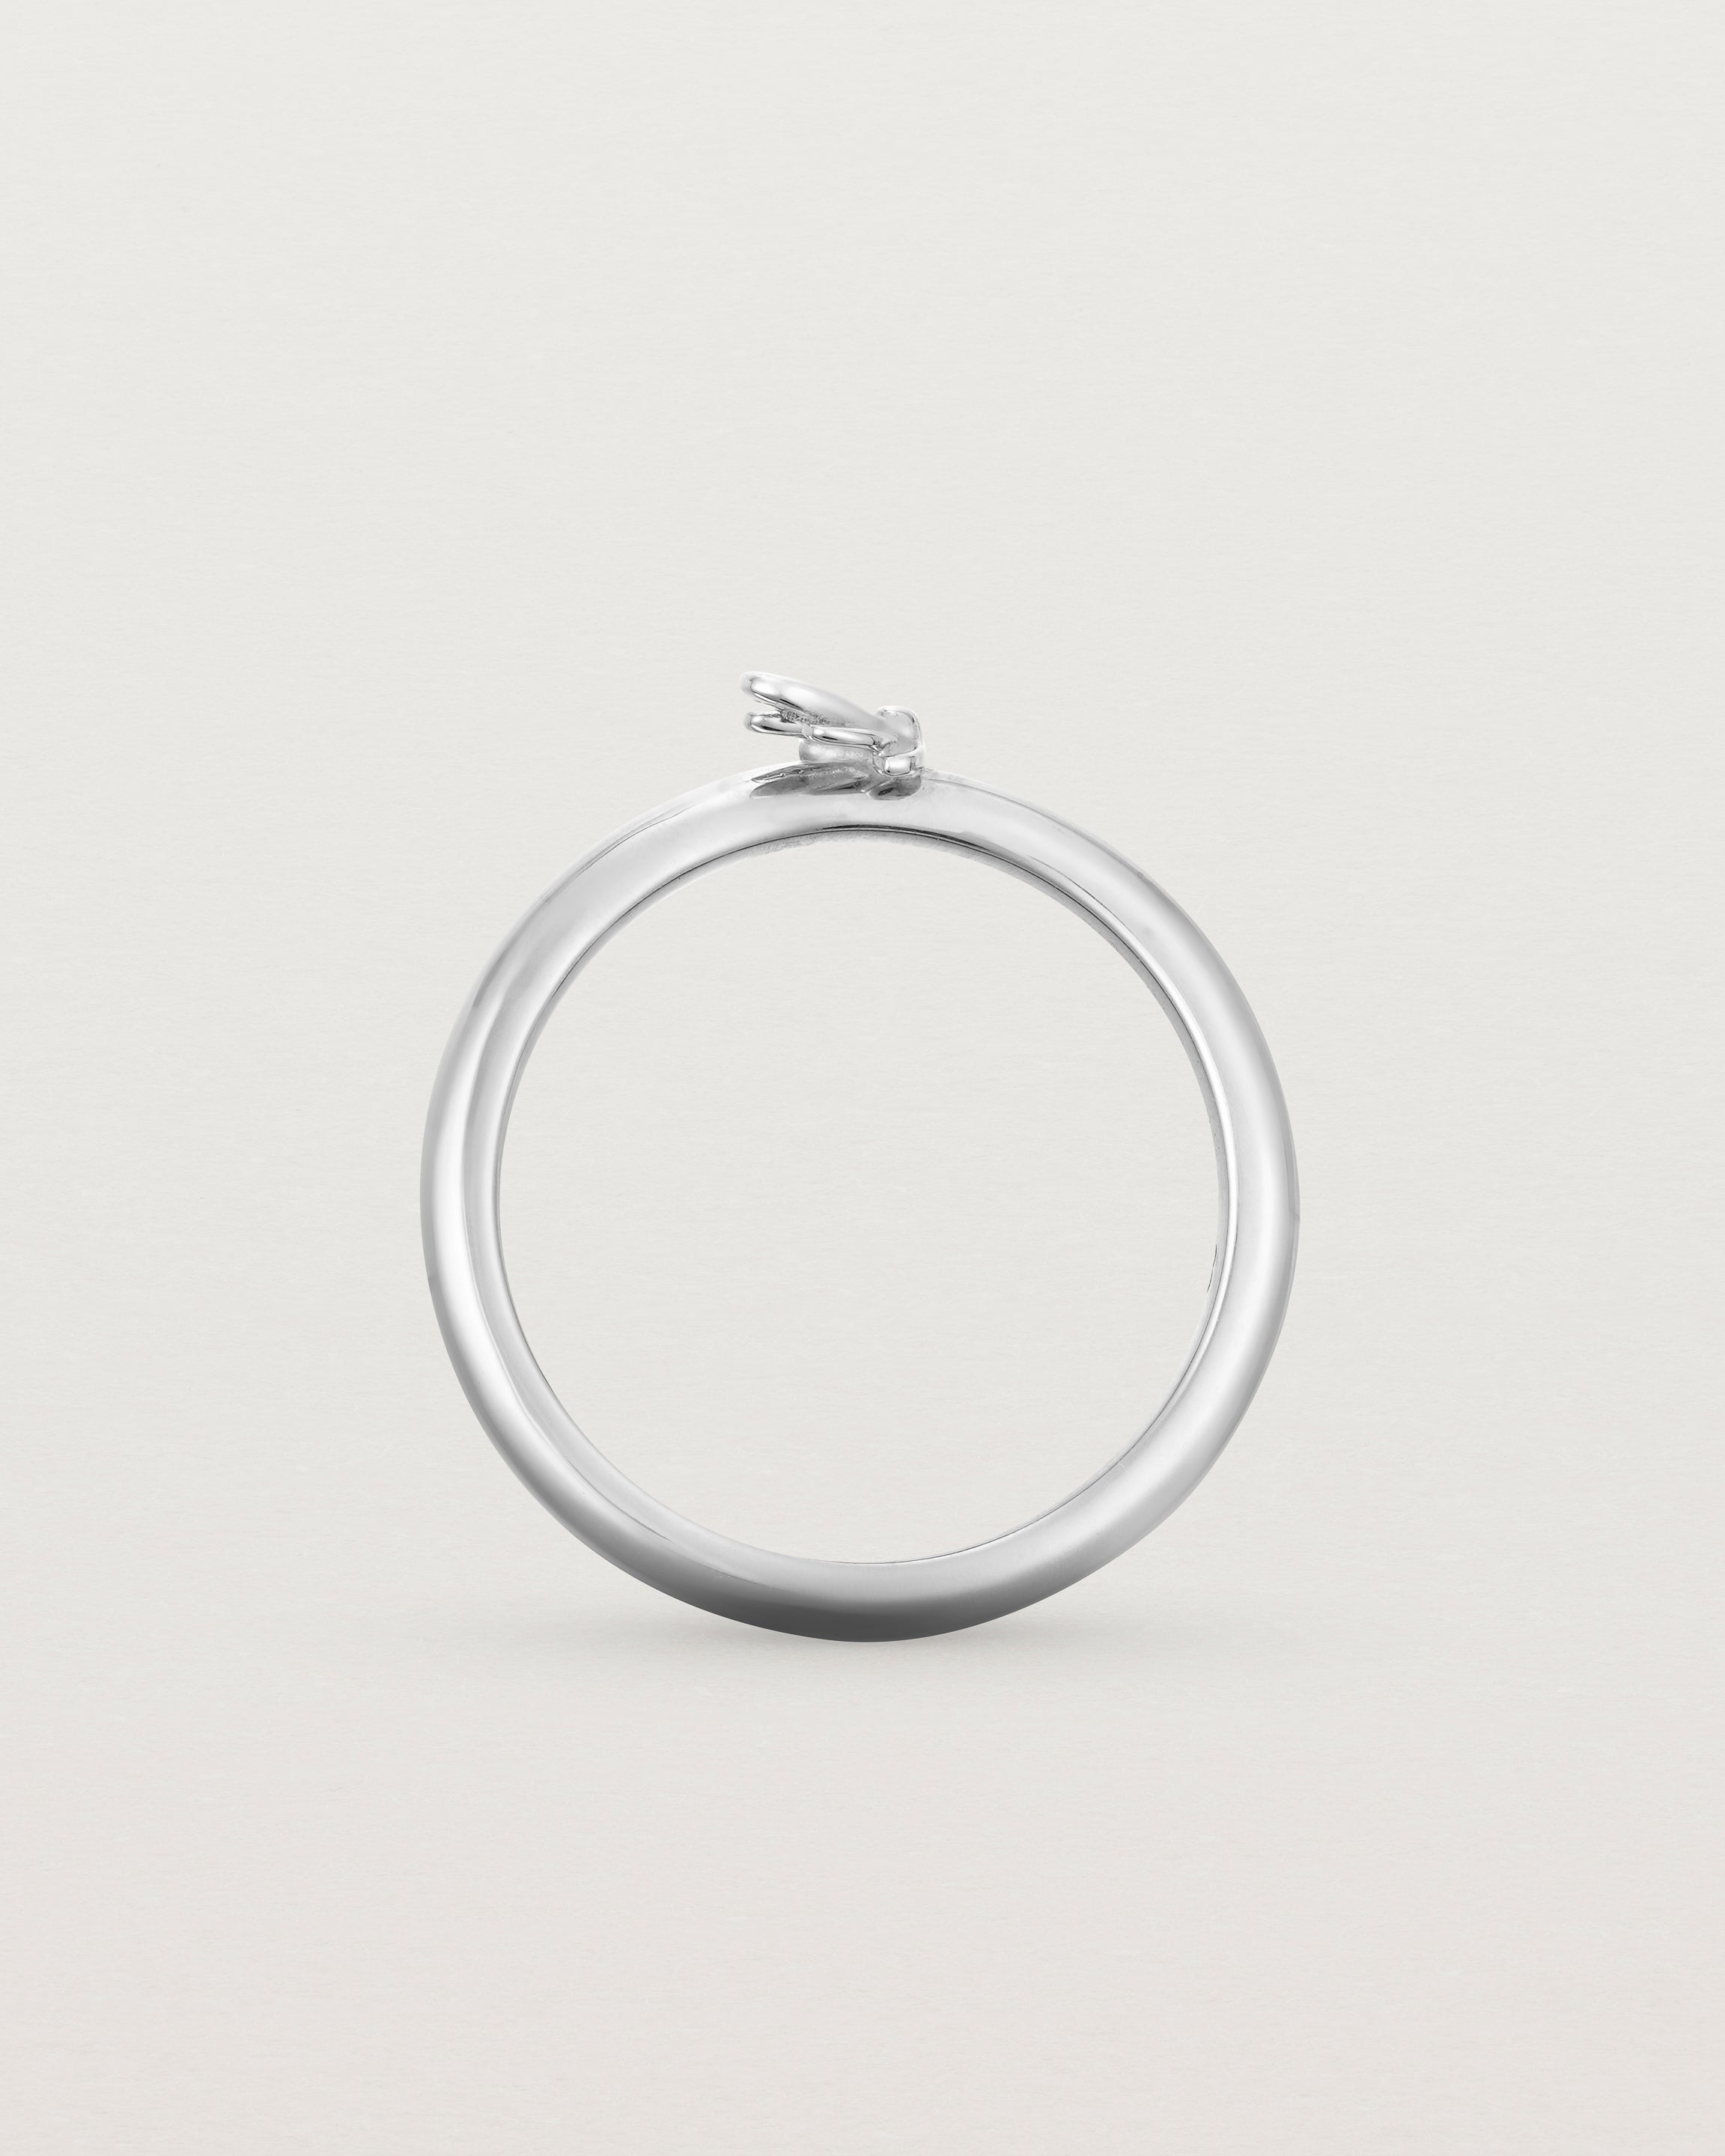 Standing view of the Aeris Stacking Ring in Sterling Silver.